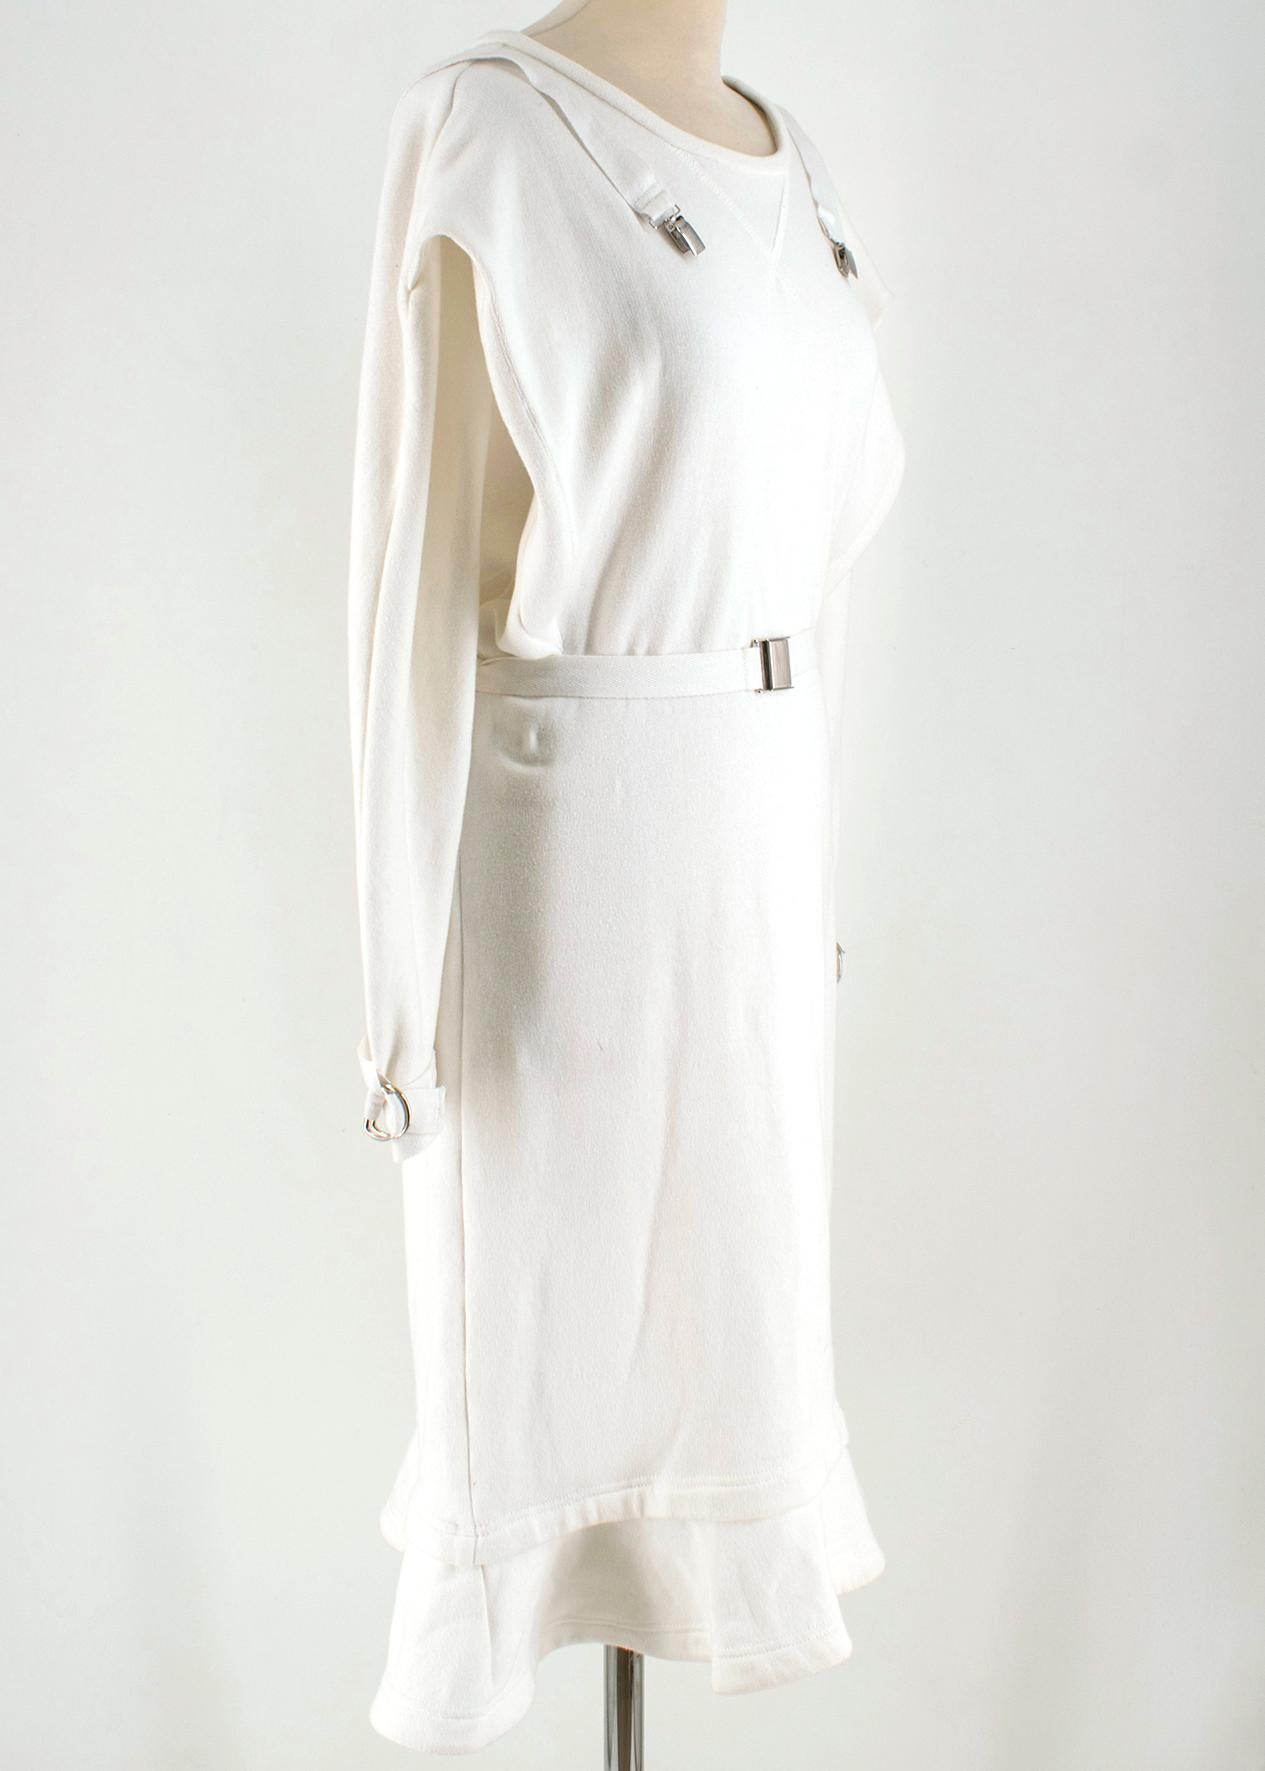 J.W.Anderson White Fleece-back Jersey Sweatshirt  Rope Dress

- White, fleece-back jersey
 dress
- Silver-tone hardware
-Adustable rope tie at  waist with silver clasps
- Adustable rope tie at cuffs
- Layered frilled hem
- Round-neck
- Long